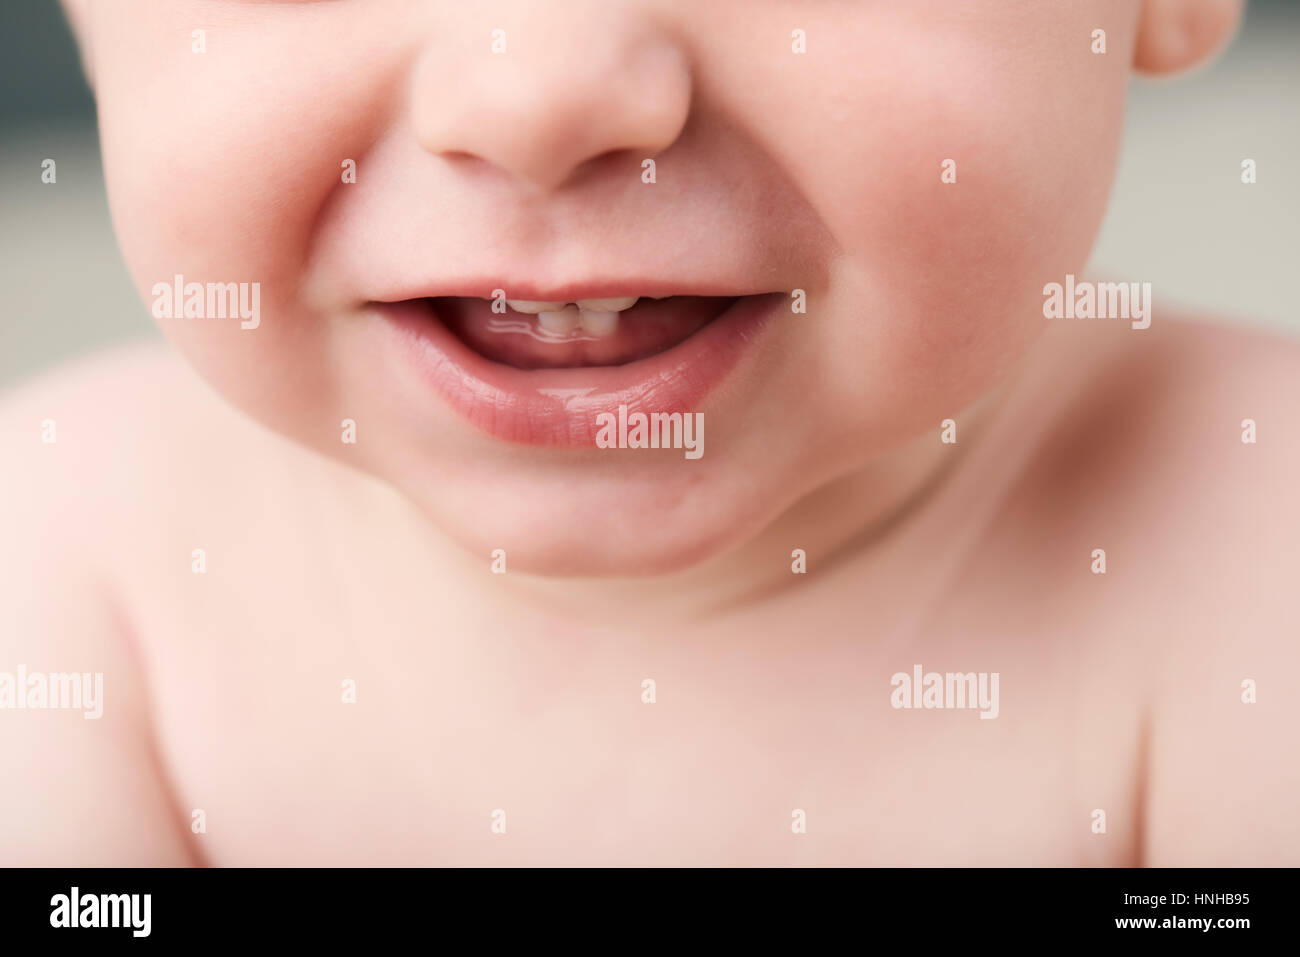 Tight crop of baby's mouth showing his first teeth Stock Photo